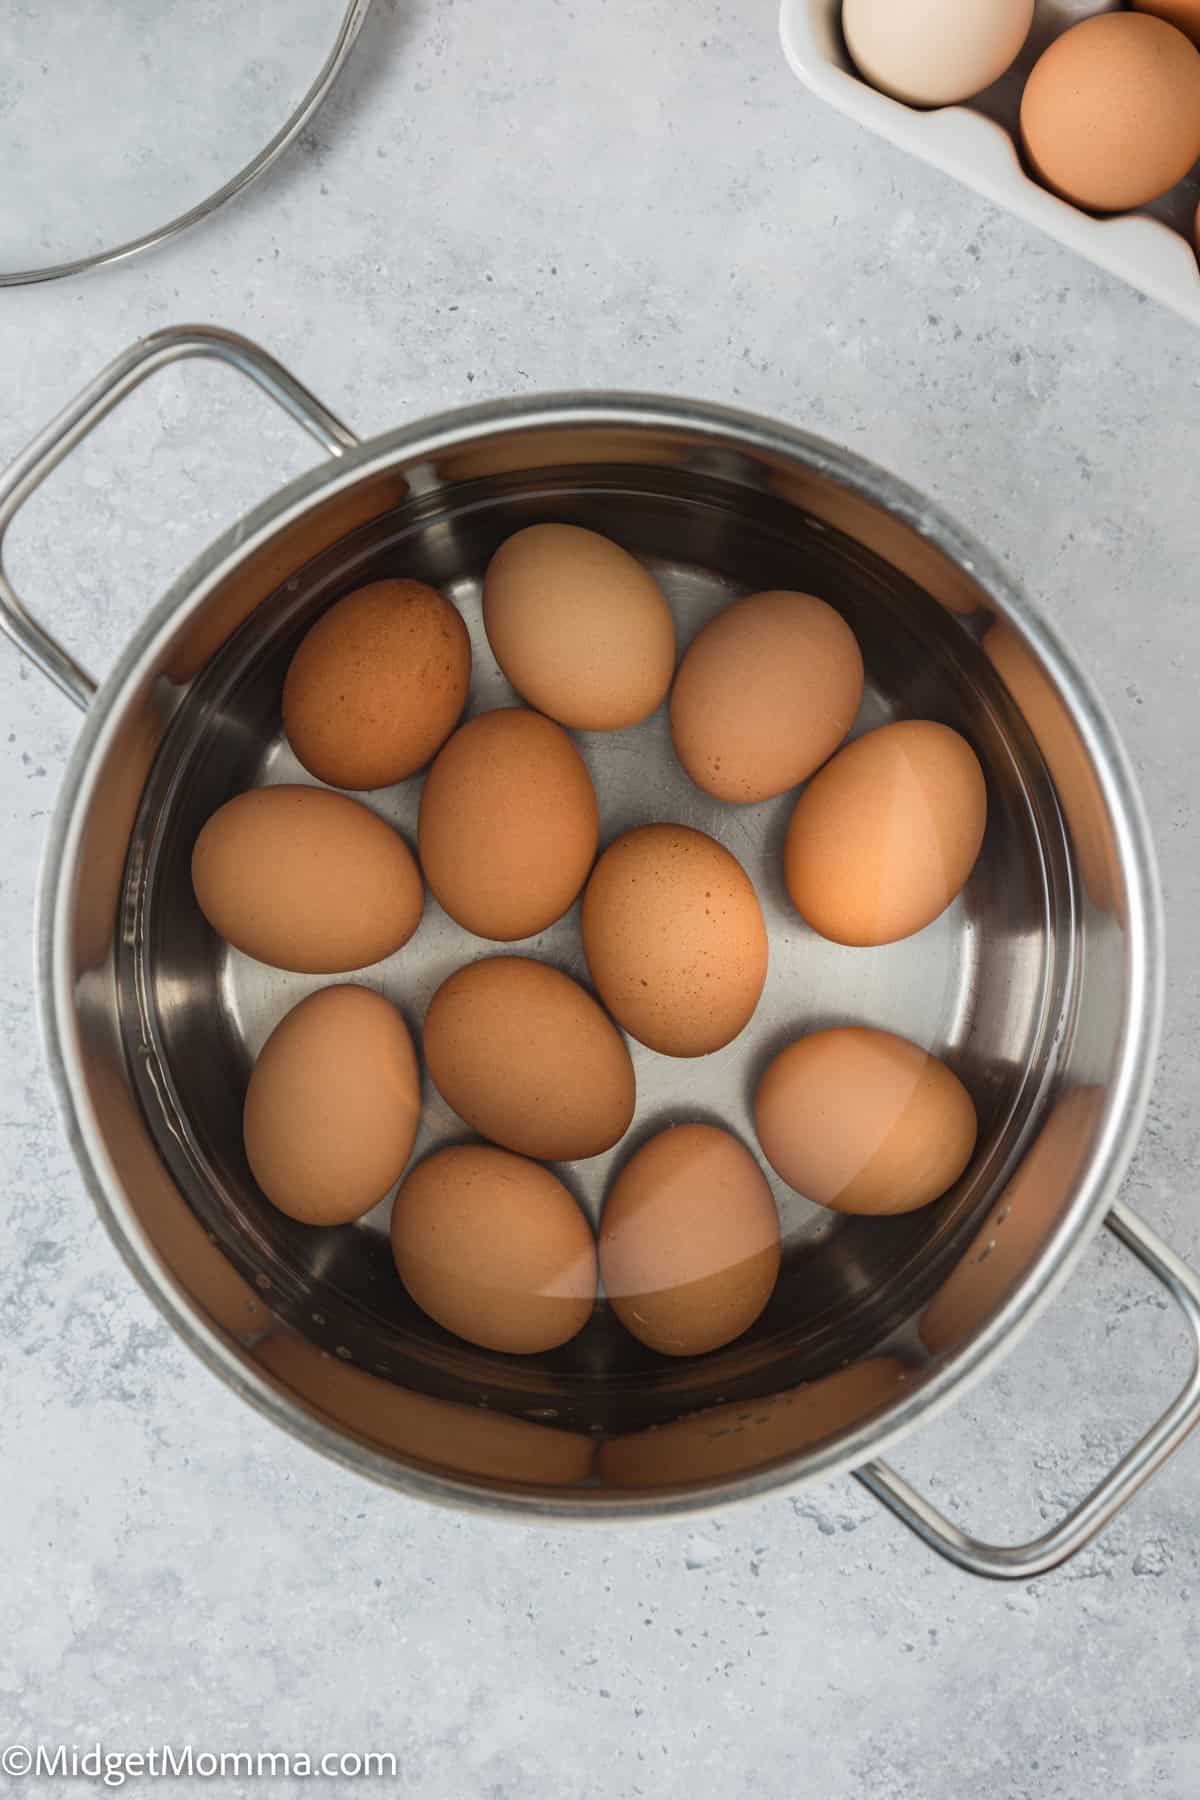 A stainless steel pot containing several brown eggs on a stovetop, viewed from above, with a few eggs on the side.